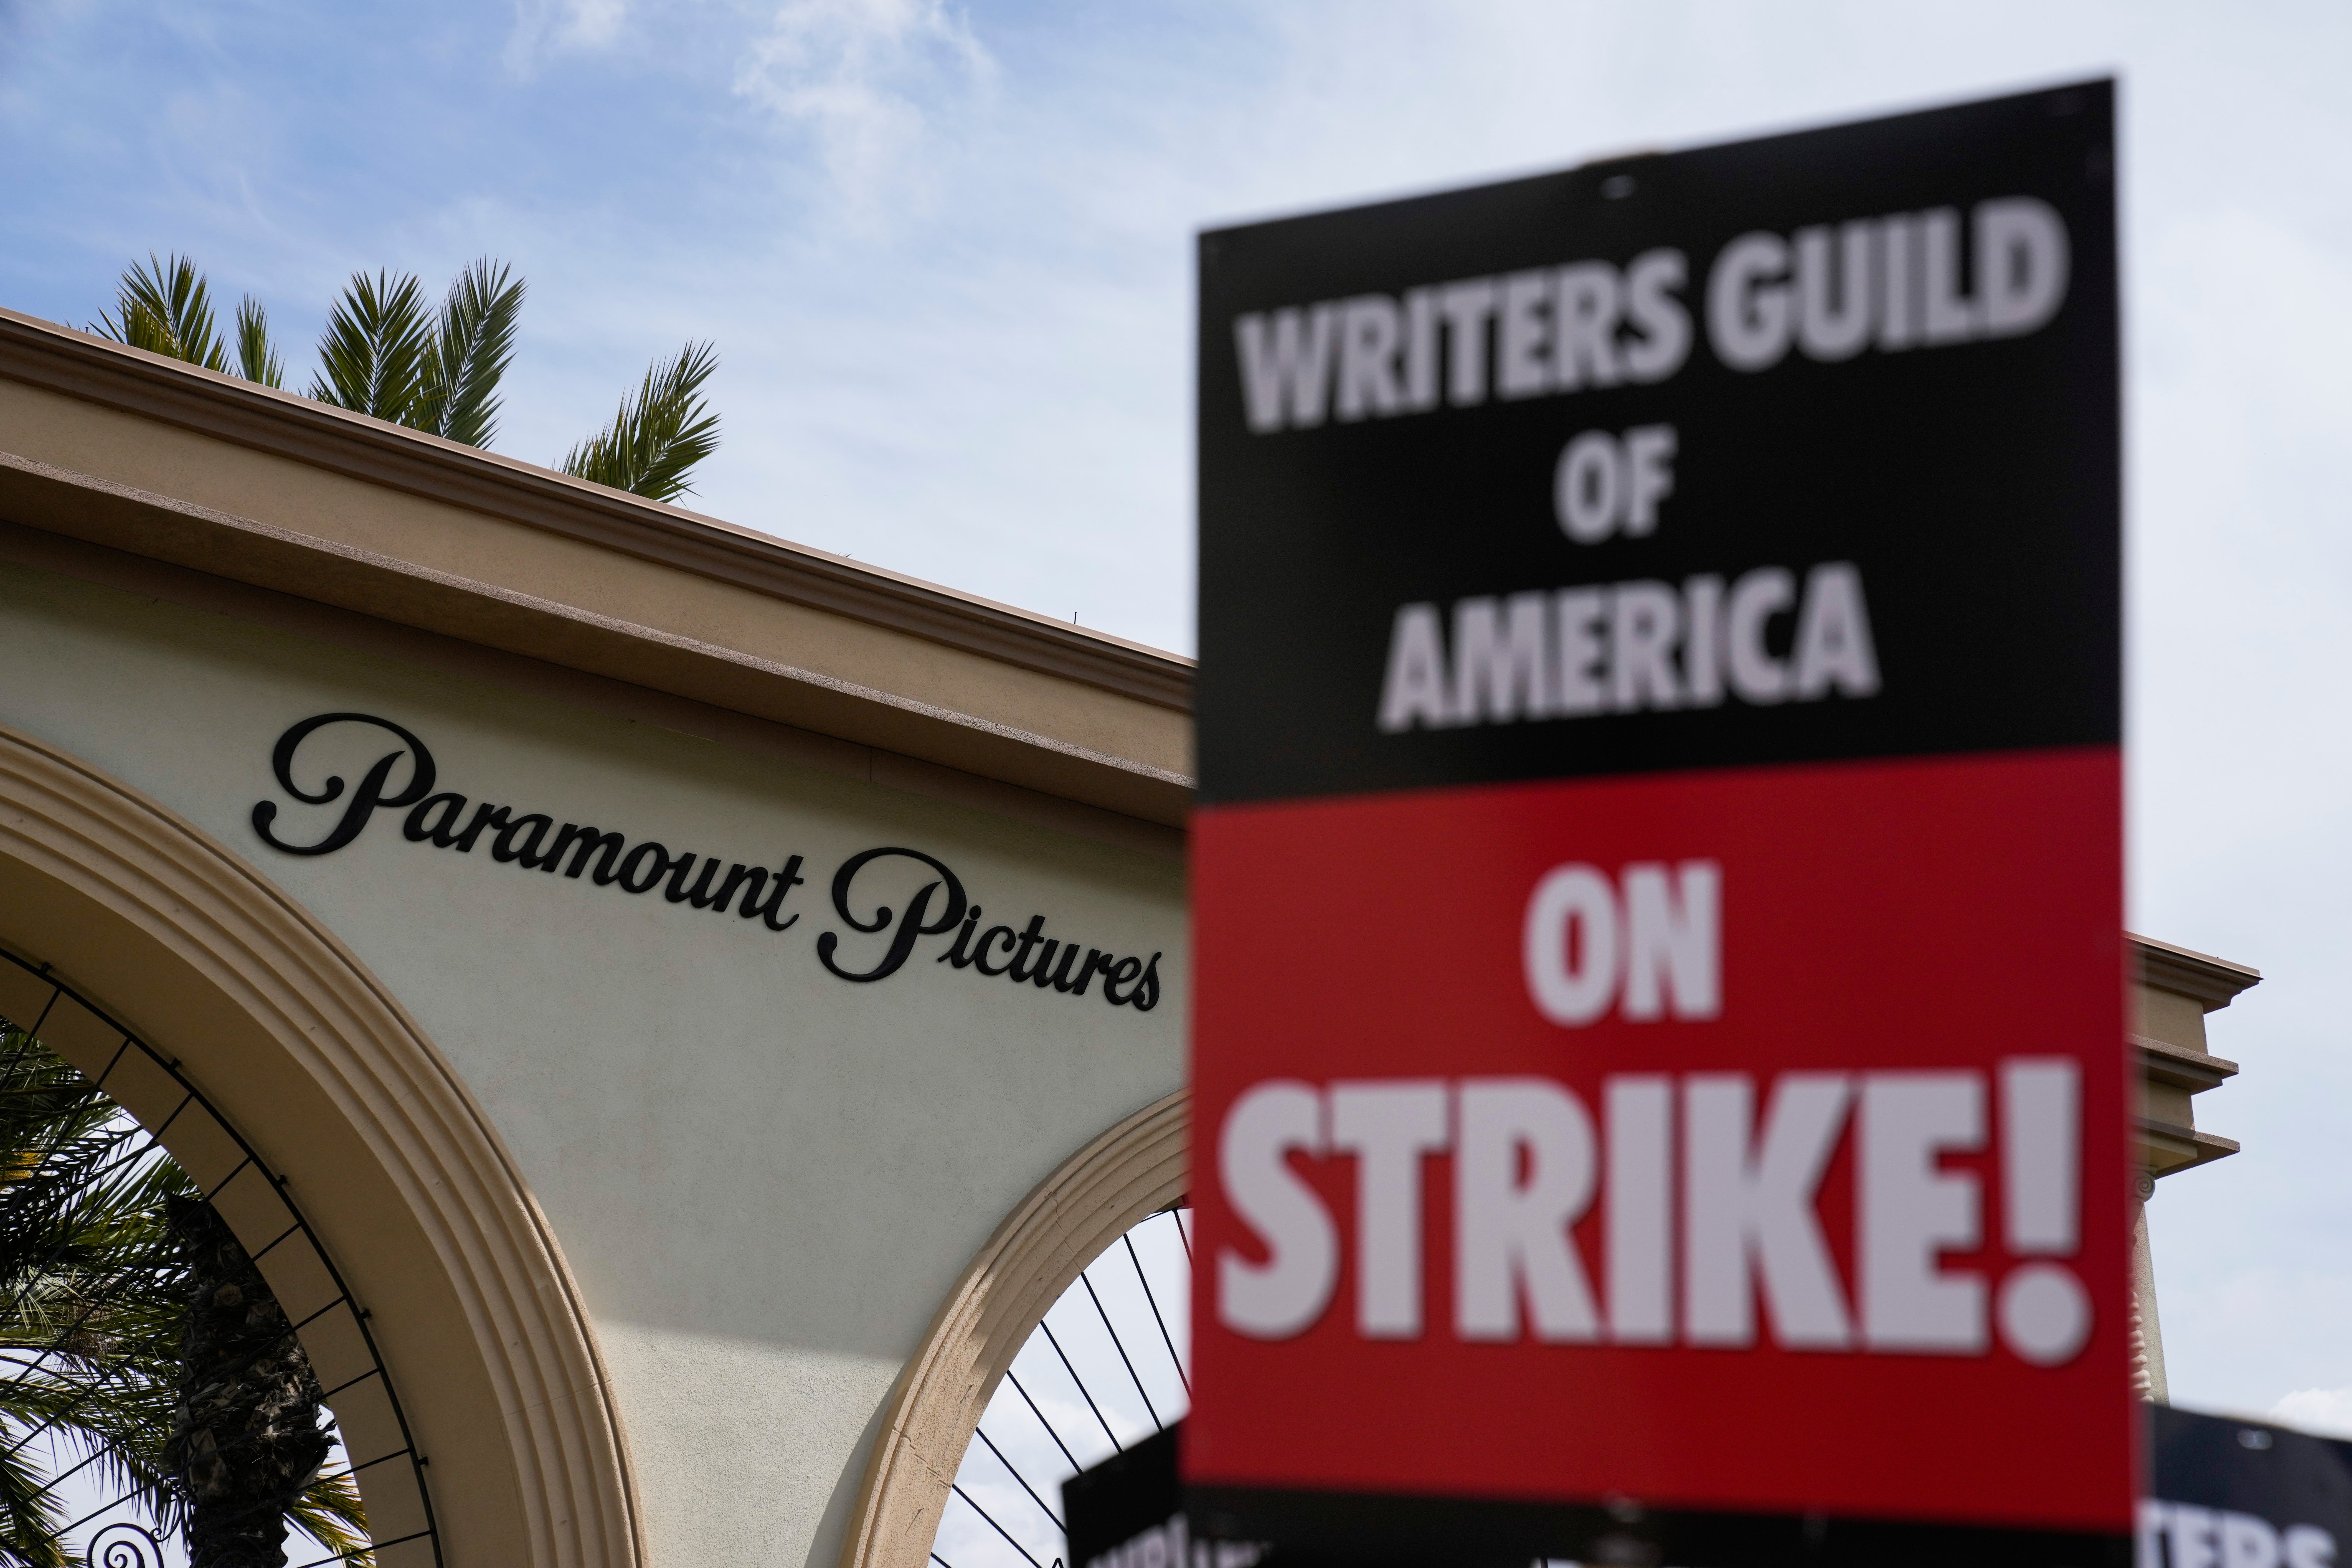 Members of the Writers Guild of America picket outside Paramount Pictures on May 3 (Ashley Landis/PA)